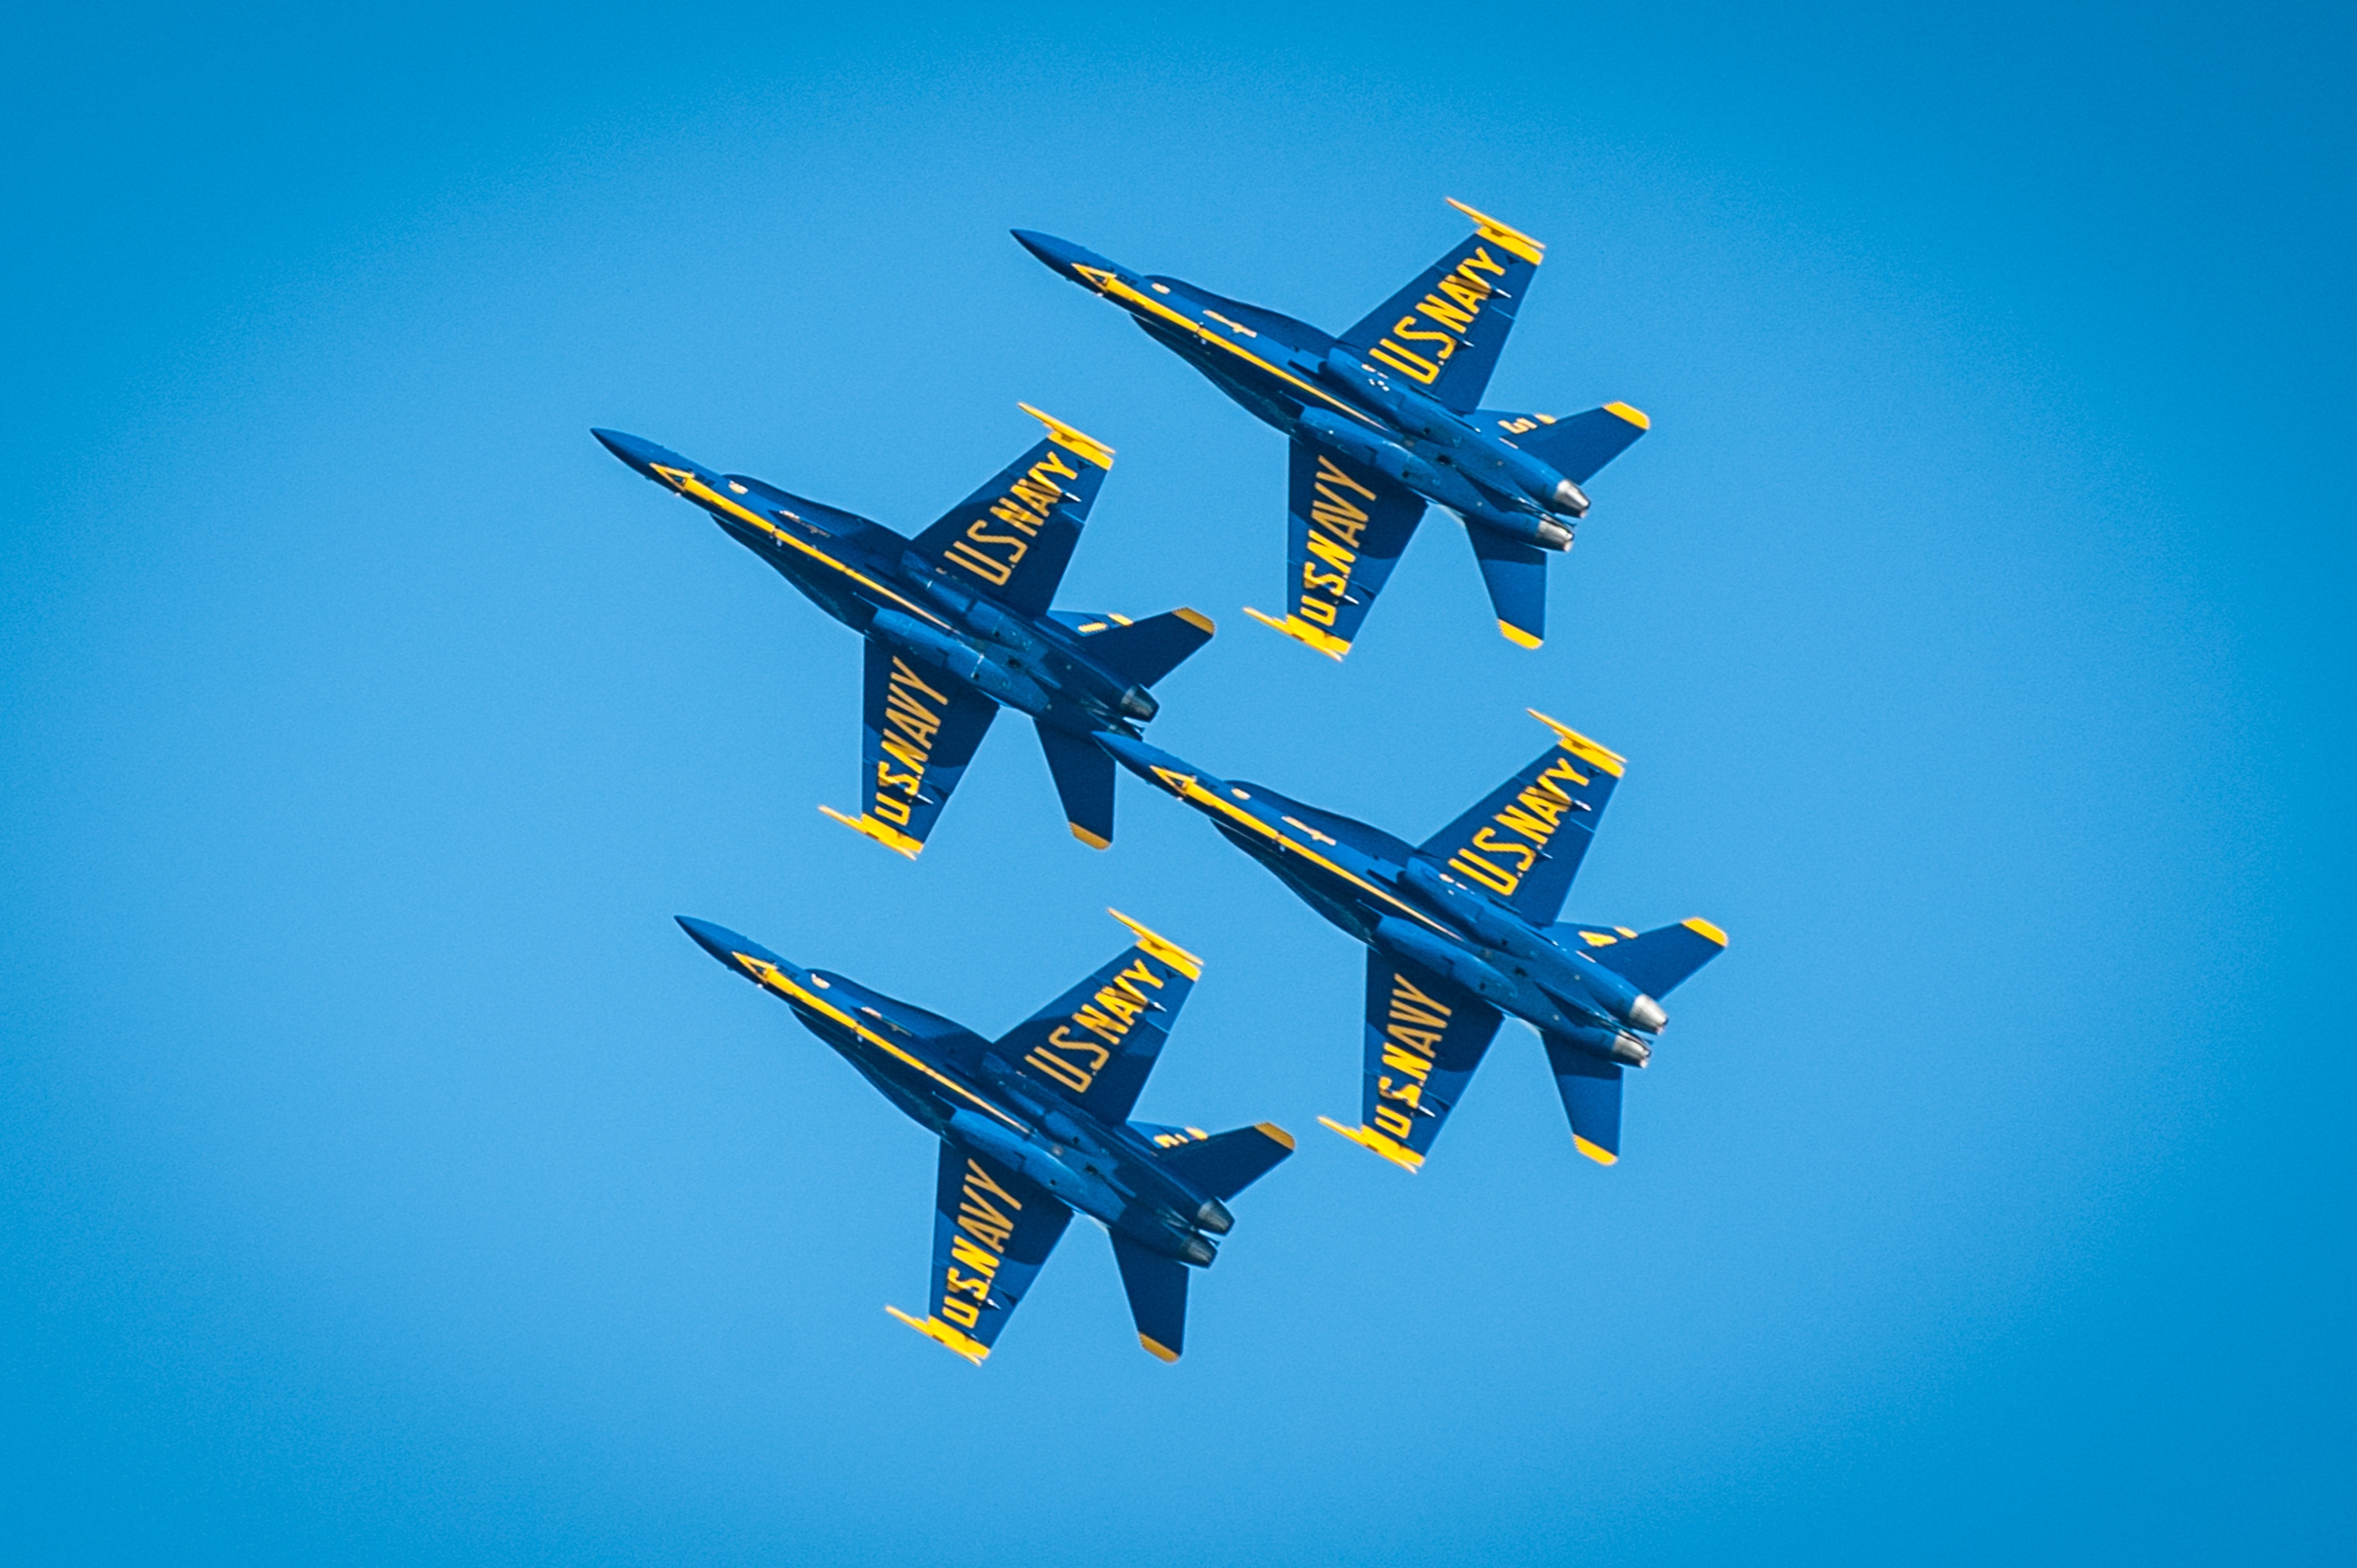 4 blue and yellow u.s. navy jet fighter